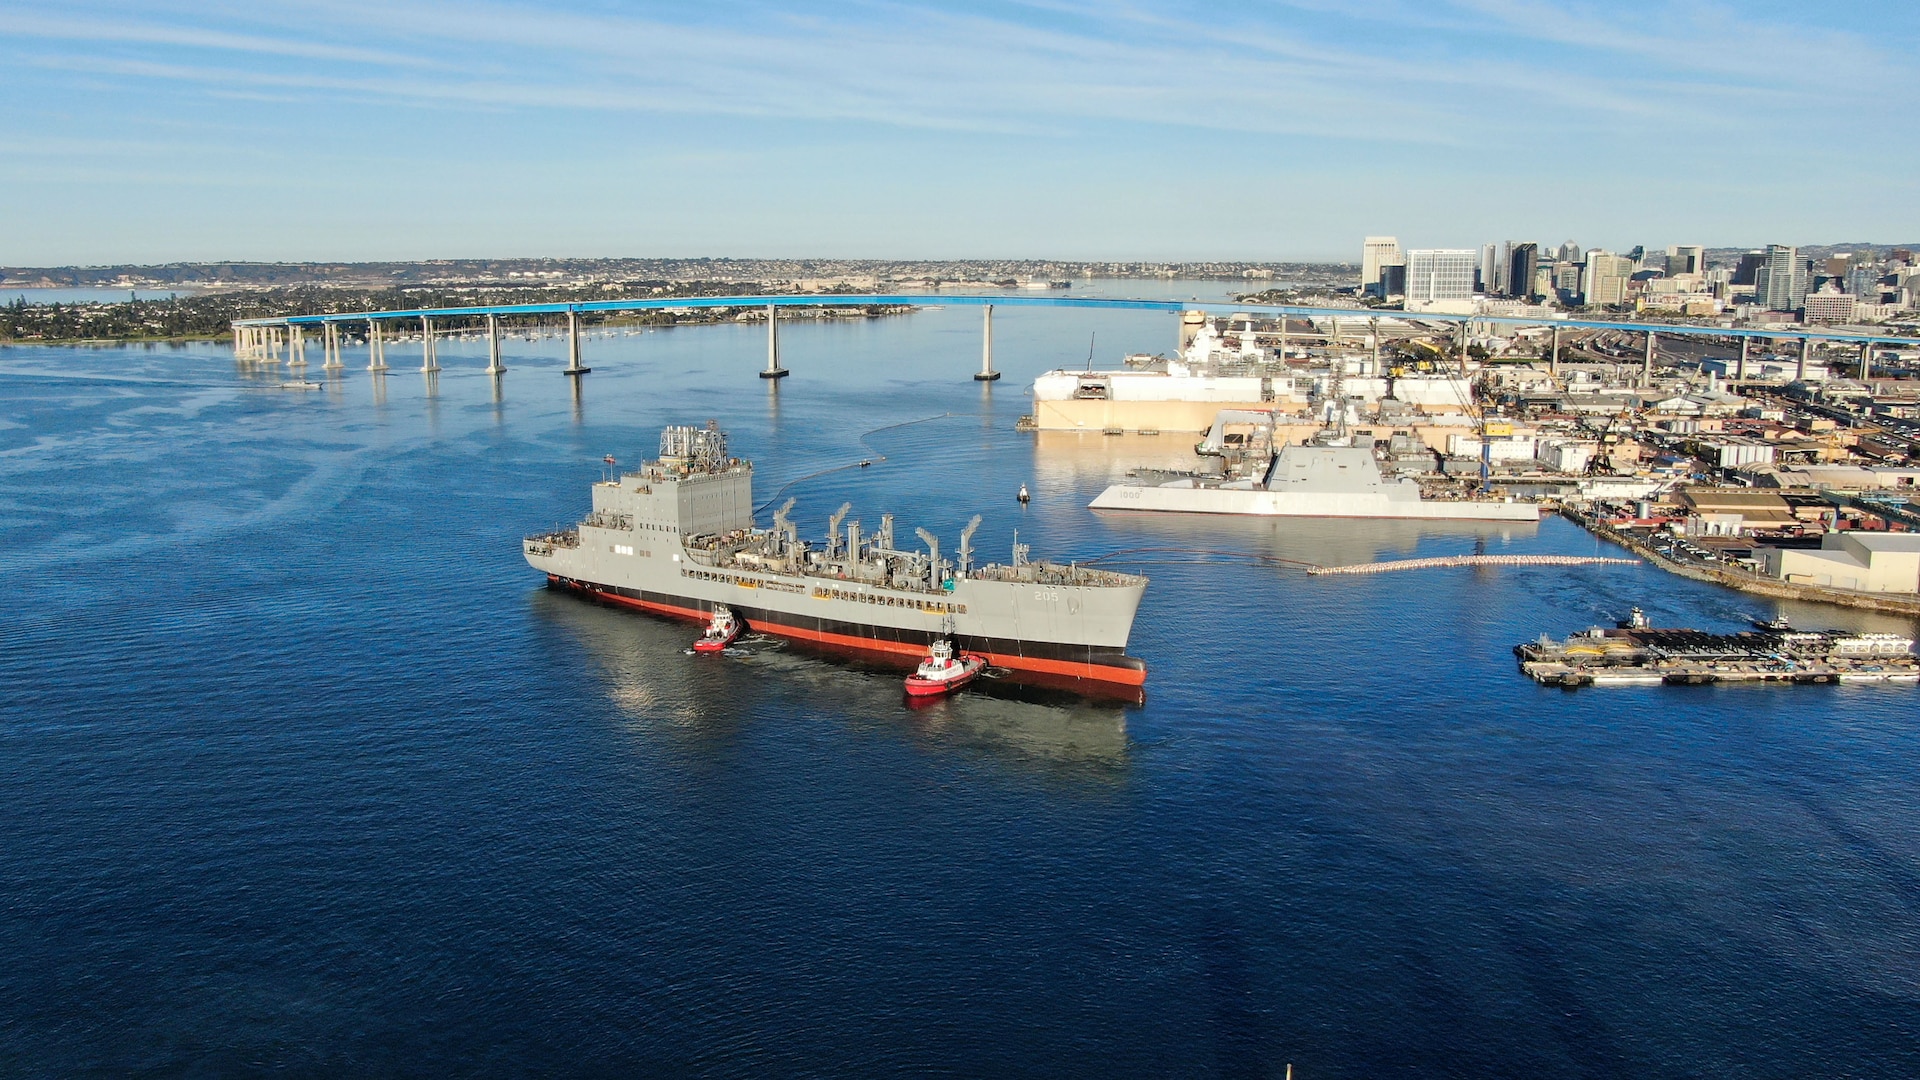 SAN DIEGO -- The future USNS John Lewis (T-AO 205), the Navy’s first-in-class Fleet Replenishment Oiler, launched from General Dynamics-National Steel and Shipbuilding Company (GD-NASSCO) on Jan. 12, marking a significant shipbuilding milestone.